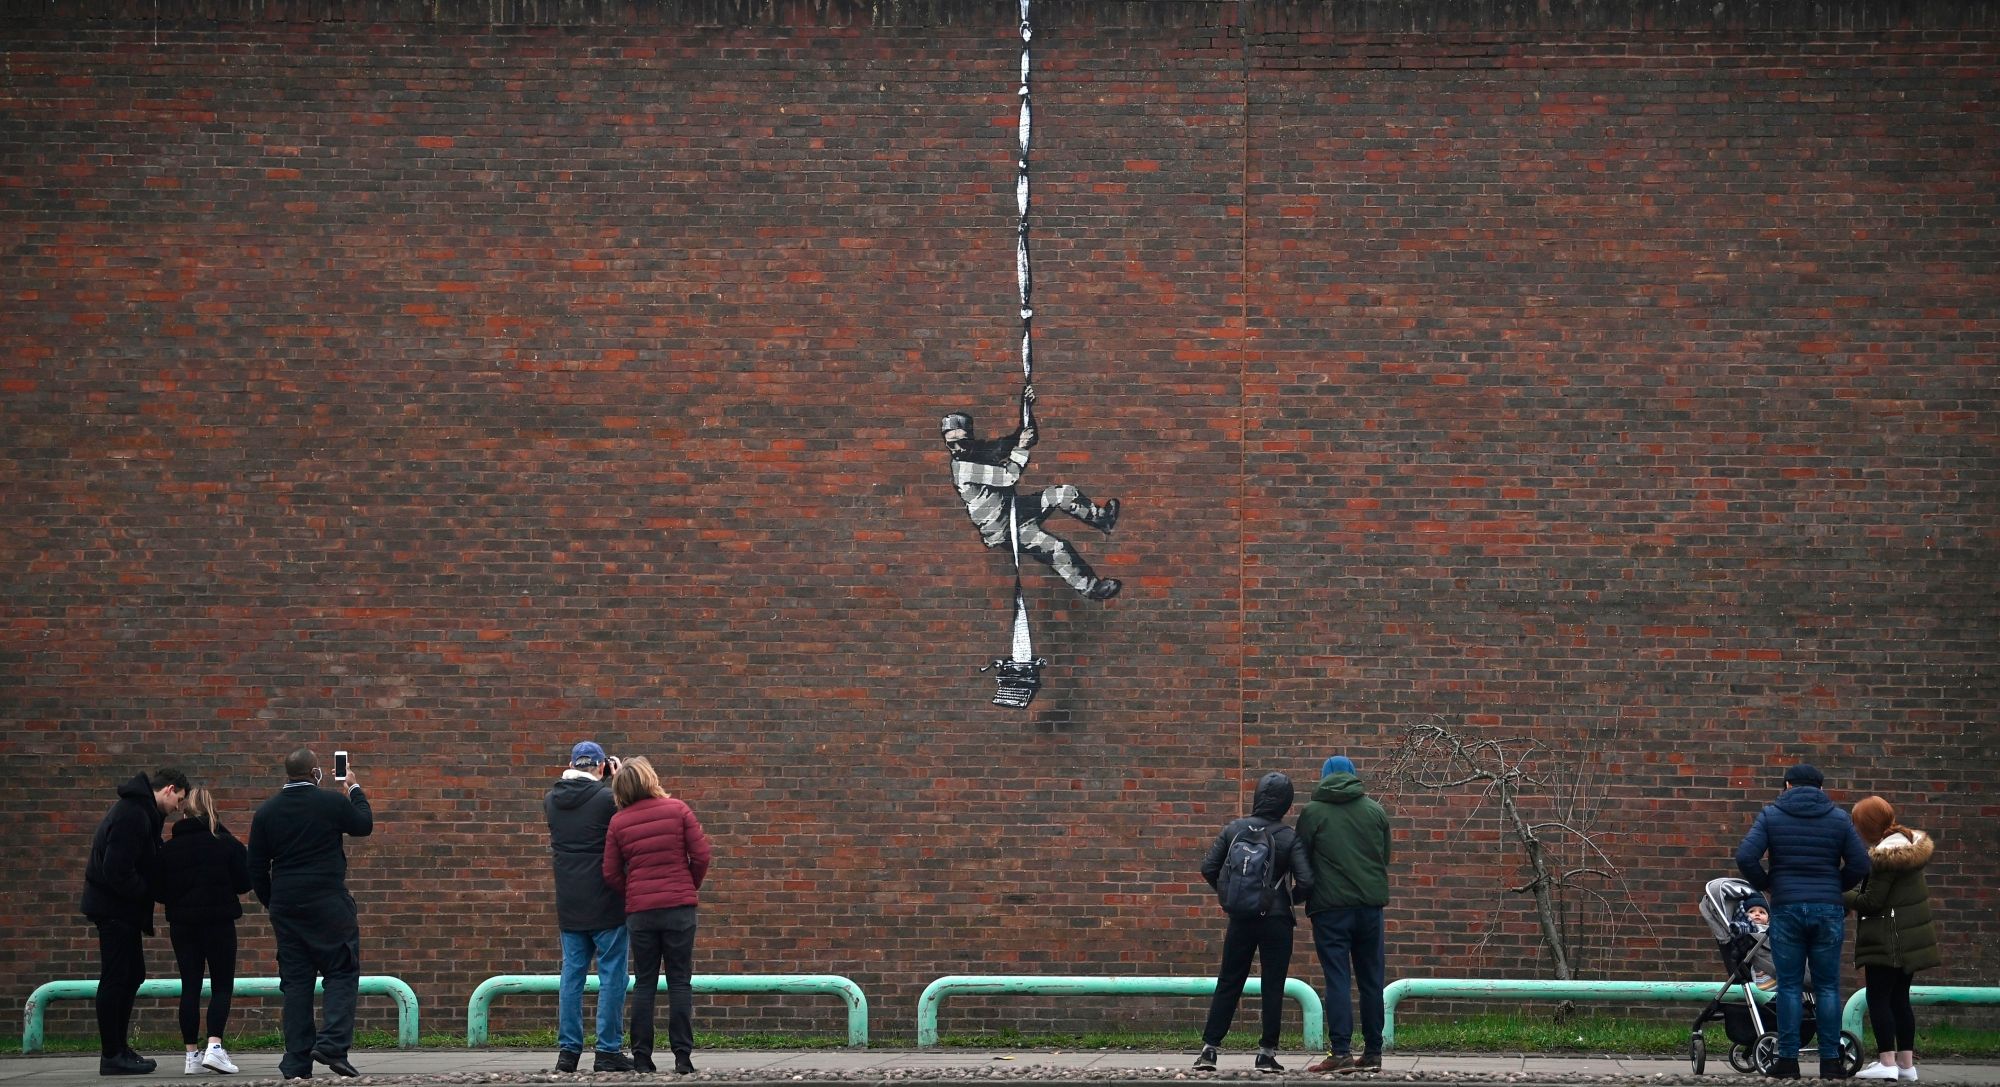 TOPSHOT - Members of the public pause to look at an artwork bearing the hallmarks of street artist Banksy on the side of Reading Prison in Reading, west of London, on March 2, 2021. - The picture shows a prisoner, possibly resembling famous inmate Oscar Wilde, escaping on a rope made of bedsheets tied to a typewriter. The work has not yet been claimed by Banksy. (Photo by BEN STANSALL / AFP) / RESTRICTED TO EDITORIAL USE - MANDATORY MENTION OF THE ARTIST UPON PUBLICATION - TO ILLUSTRATE THE EVENT AS SPECIFIED IN THE CAPTION (Photo by BEN STANSALL/AFP via Getty Images)